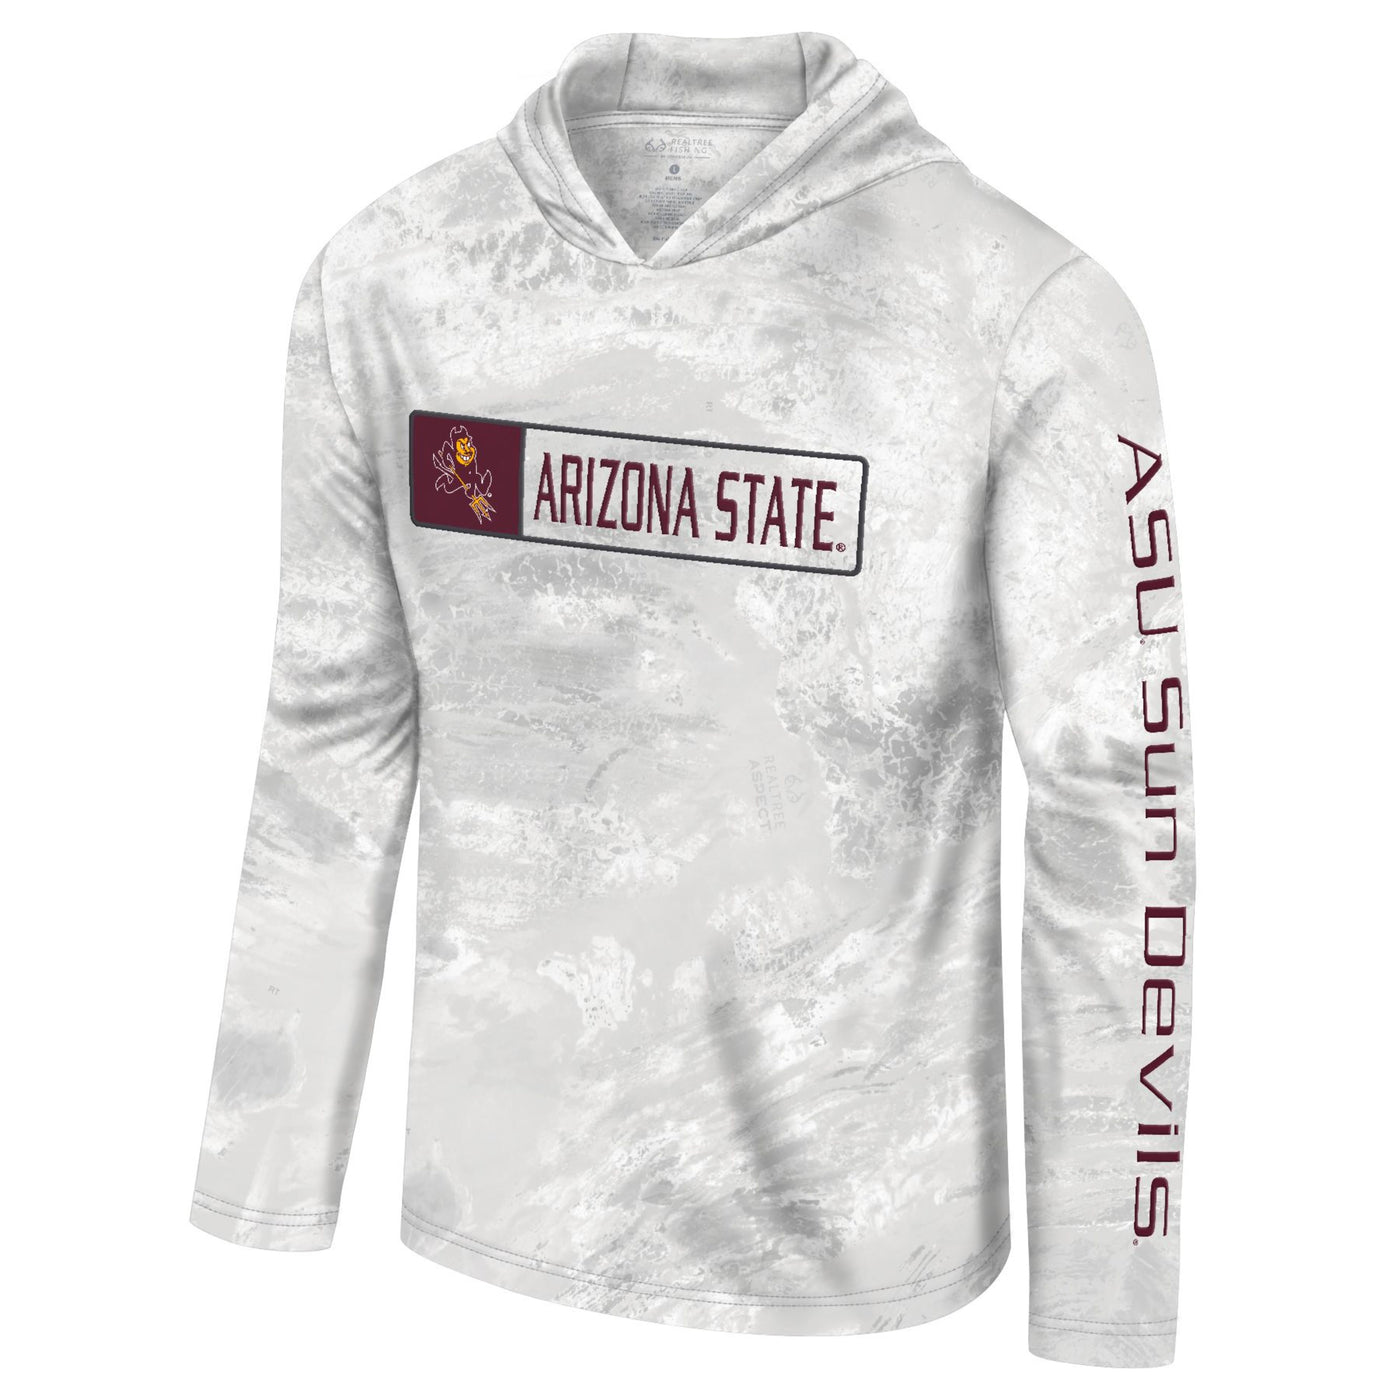 ASU hooded long sleeve in a grey and white smoky color pattern. The text 